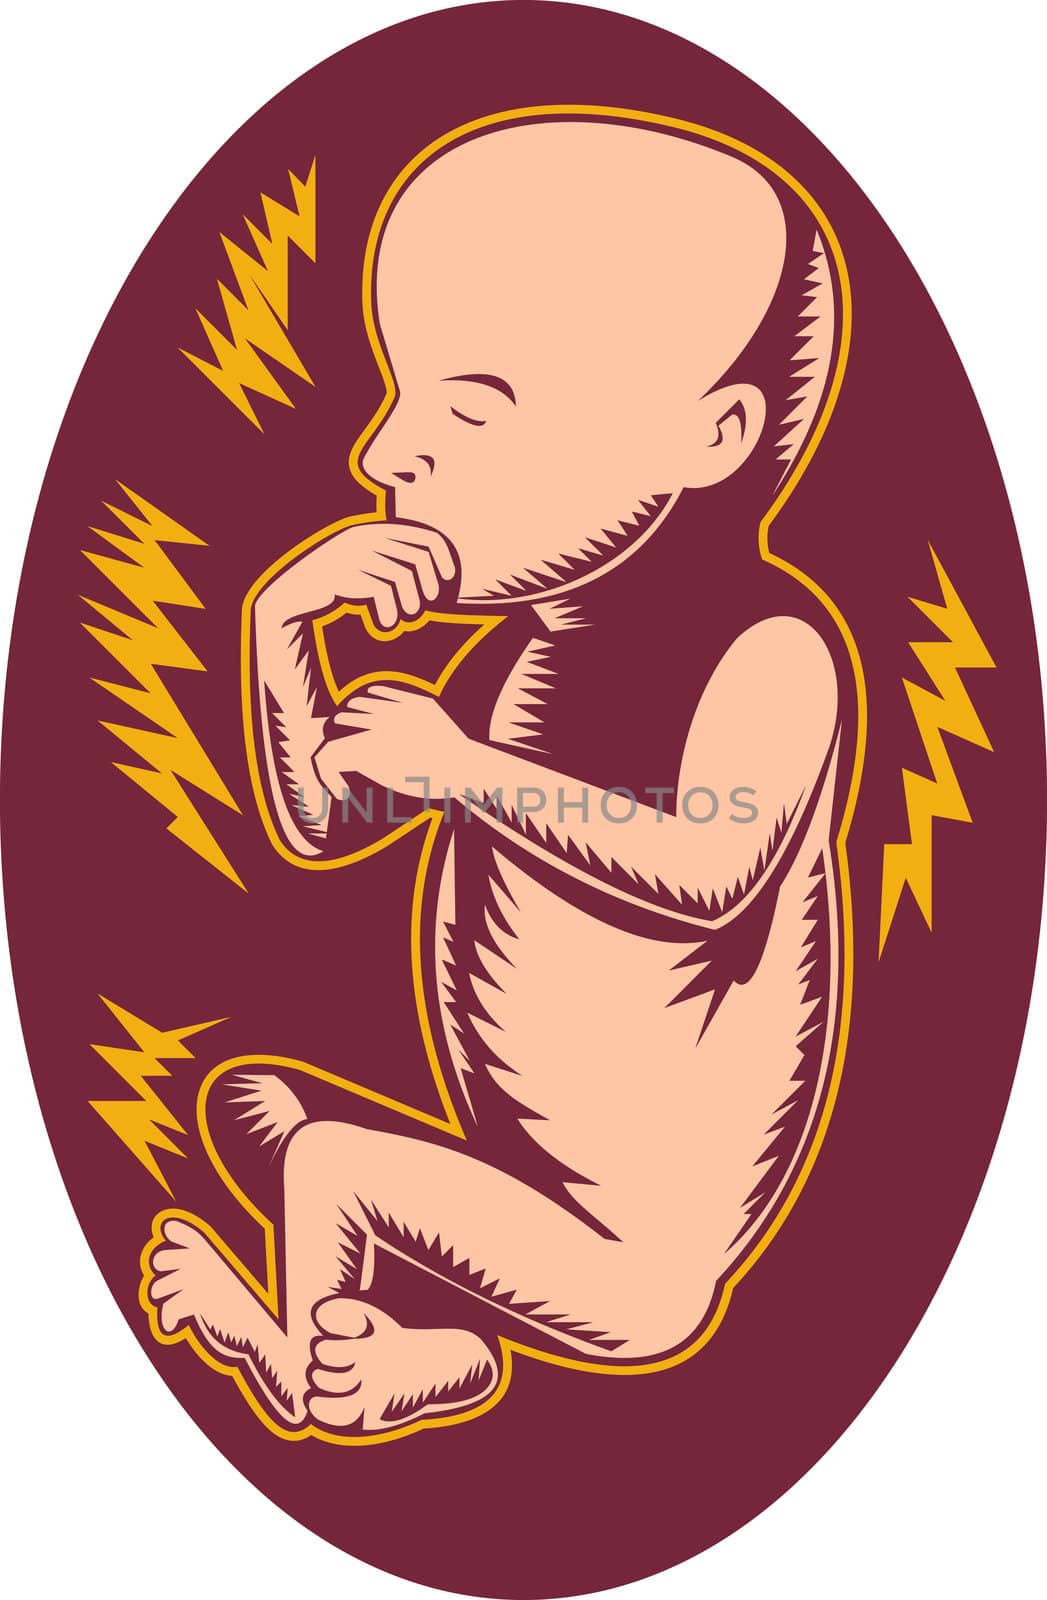 illustration of a 19 week old human fetus done in woodcut style